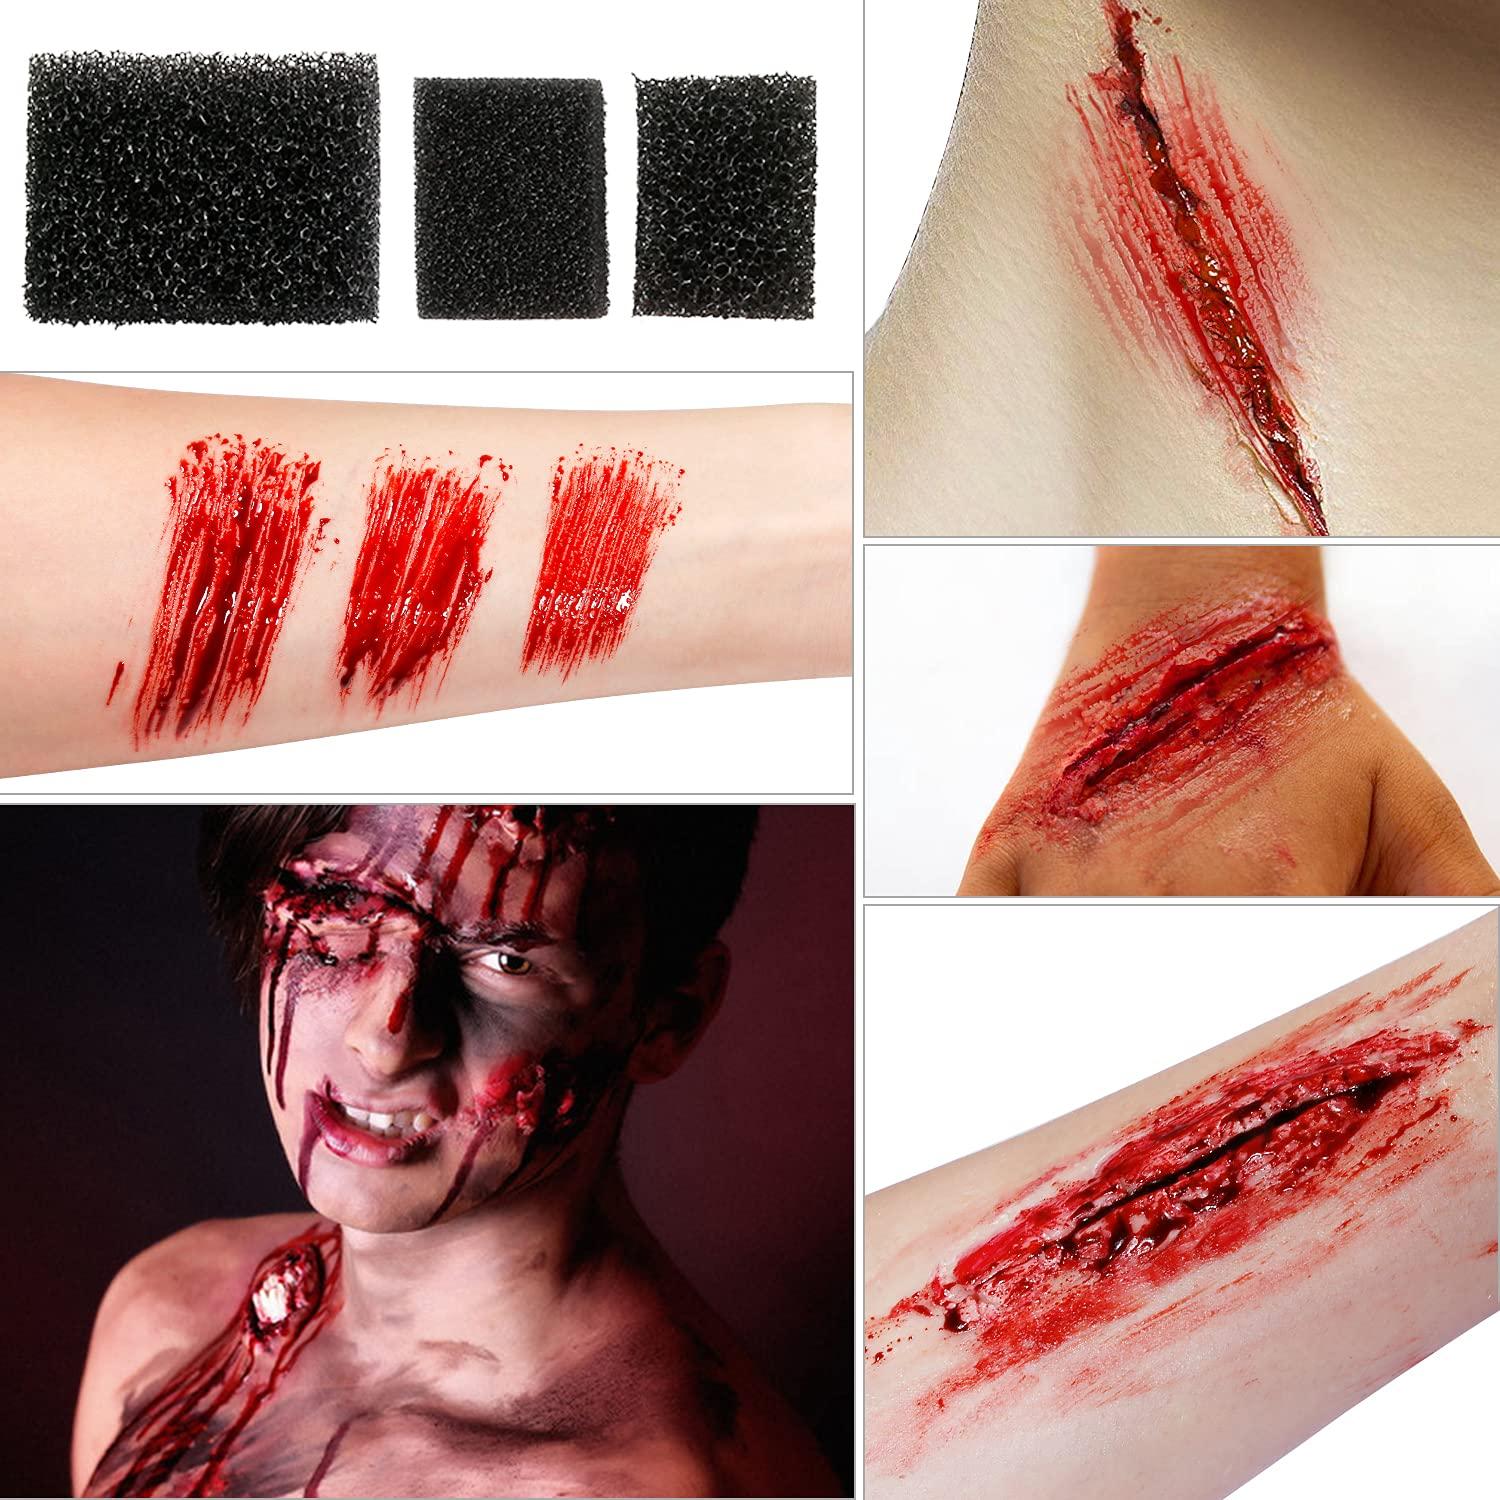 Scars Wax Special Effects Makeup Kit, Halloween Fake Blood, Face Body Paint  Set+ Wound Scar Wax with Spatula Tool + Fake Blood Splatter Spray + Sponges+Scar  Wax Extension Oil+Coagulatad Blood - Yahoo